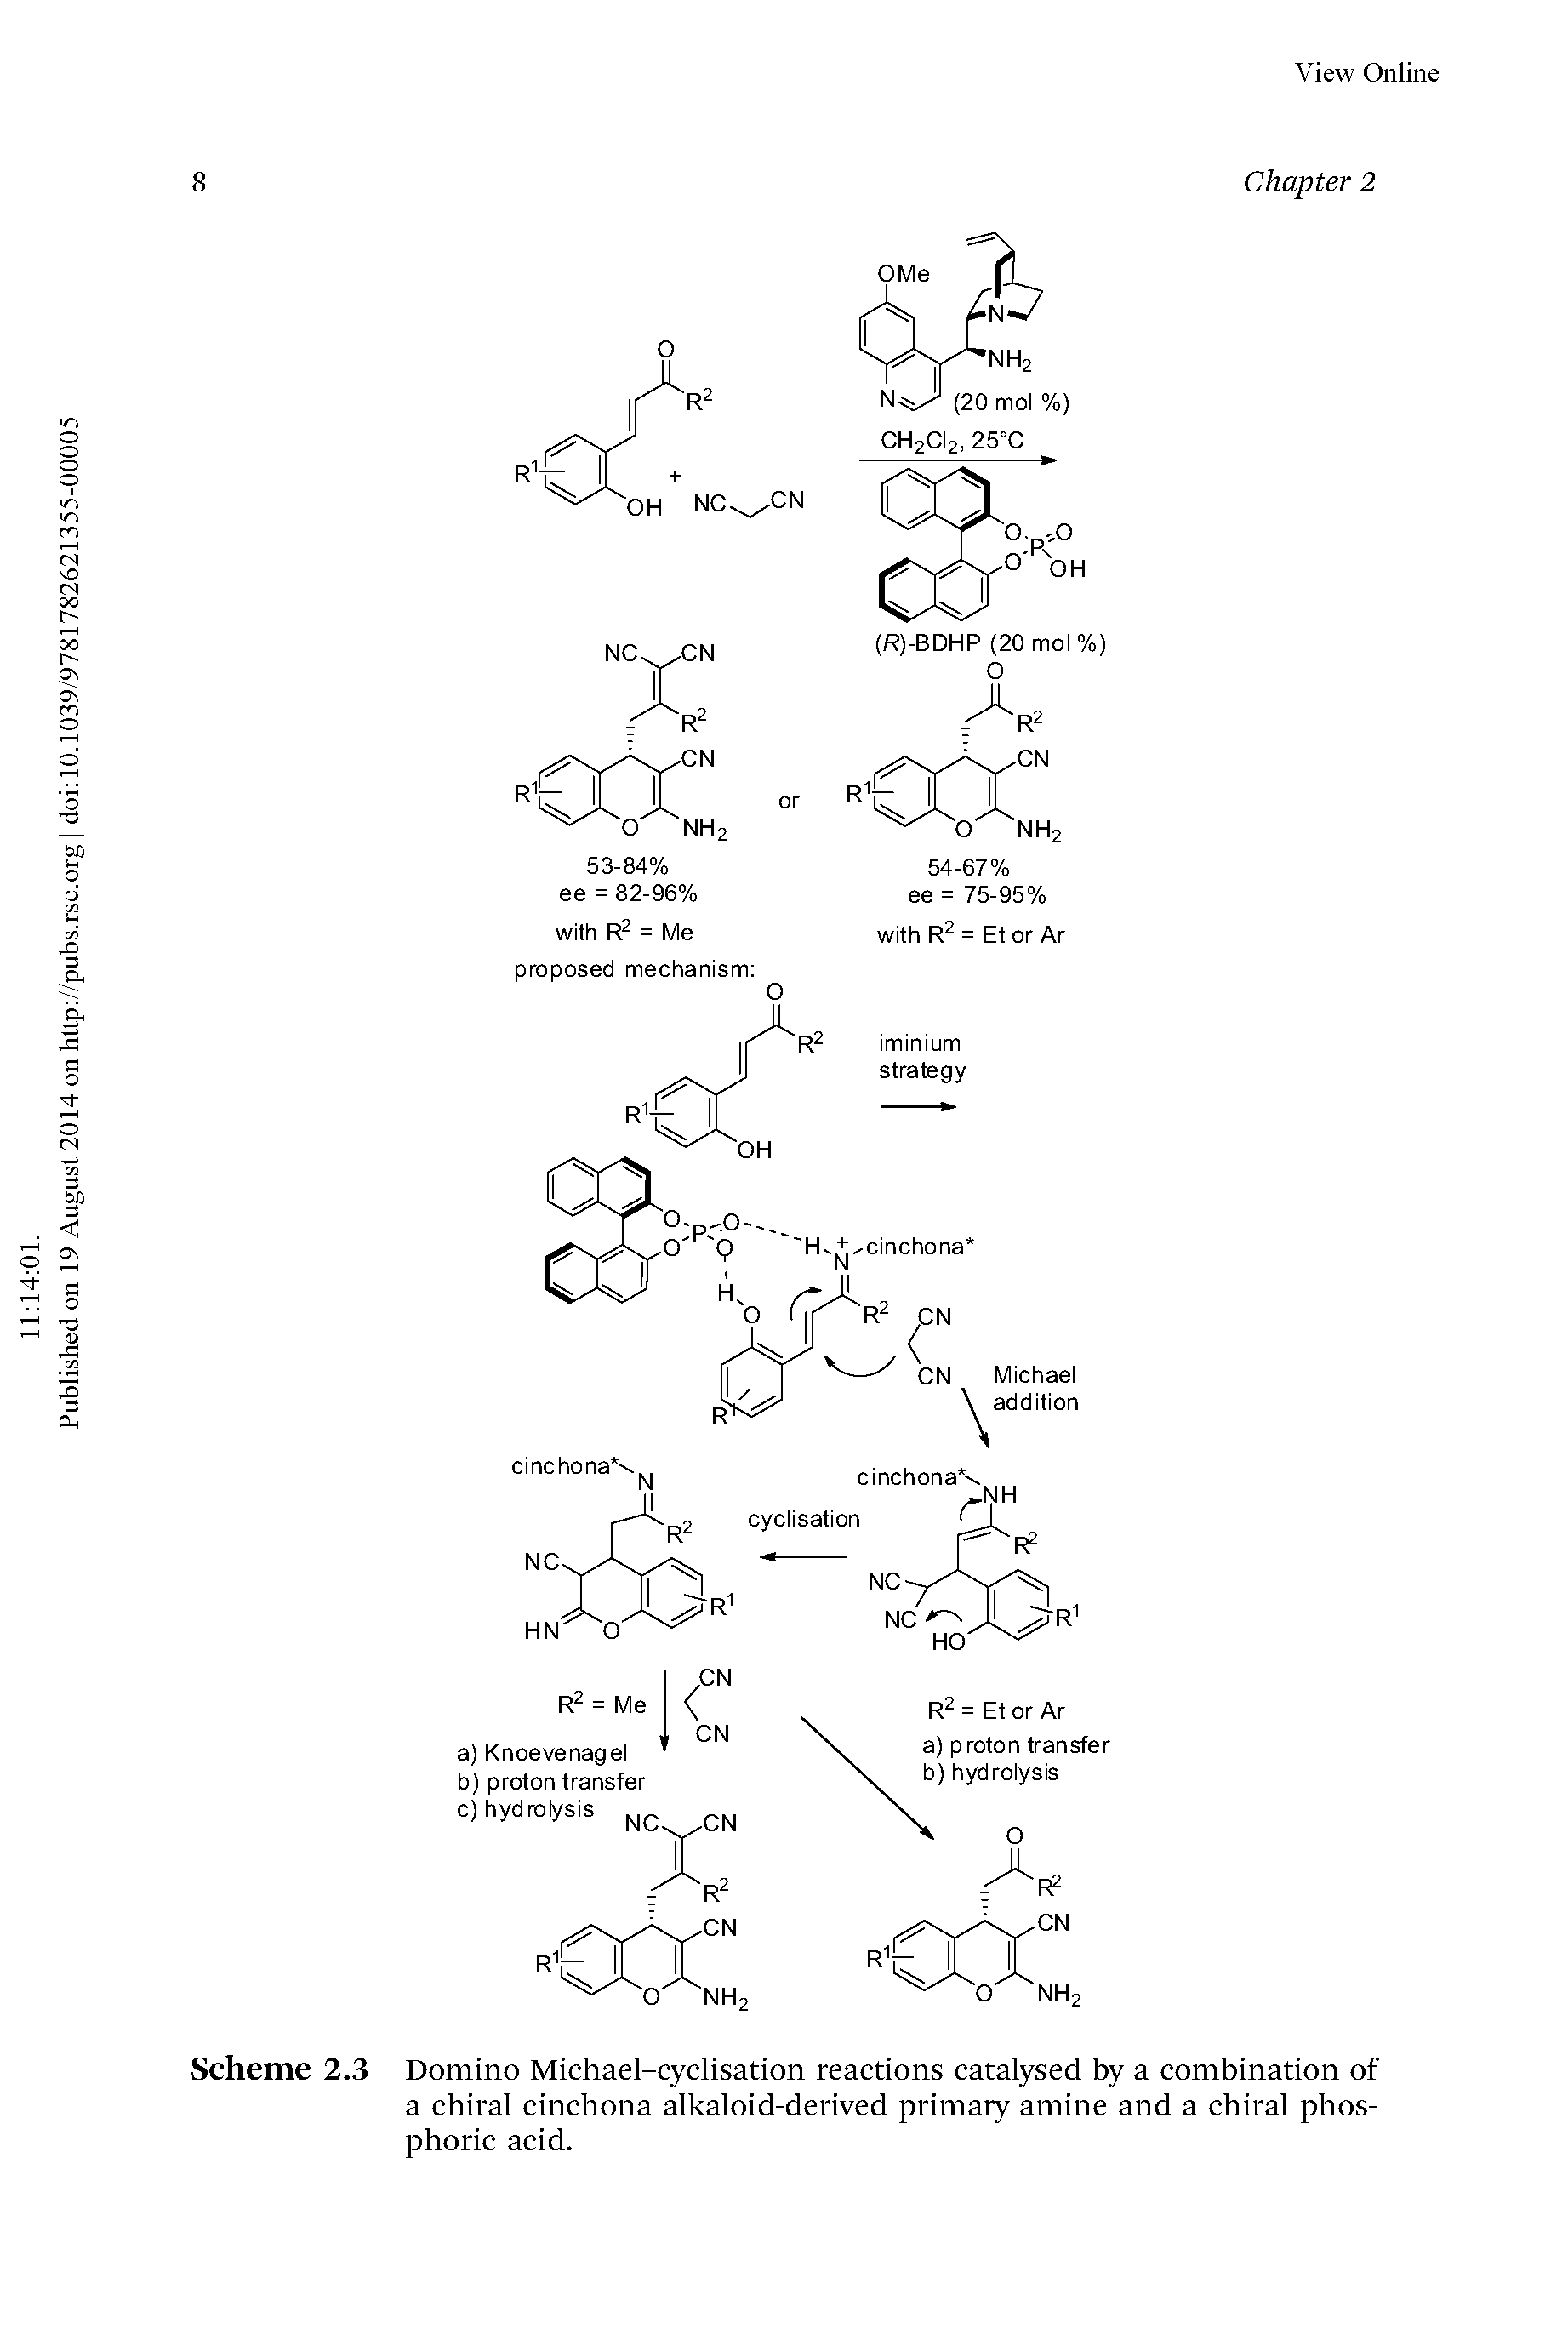 Scheme 2.3 Domino Michael-cyclisation reactions catalysed by a combination of a chiral cinchona alkaloid-derived primary amine and a chiral phosphoric acid.